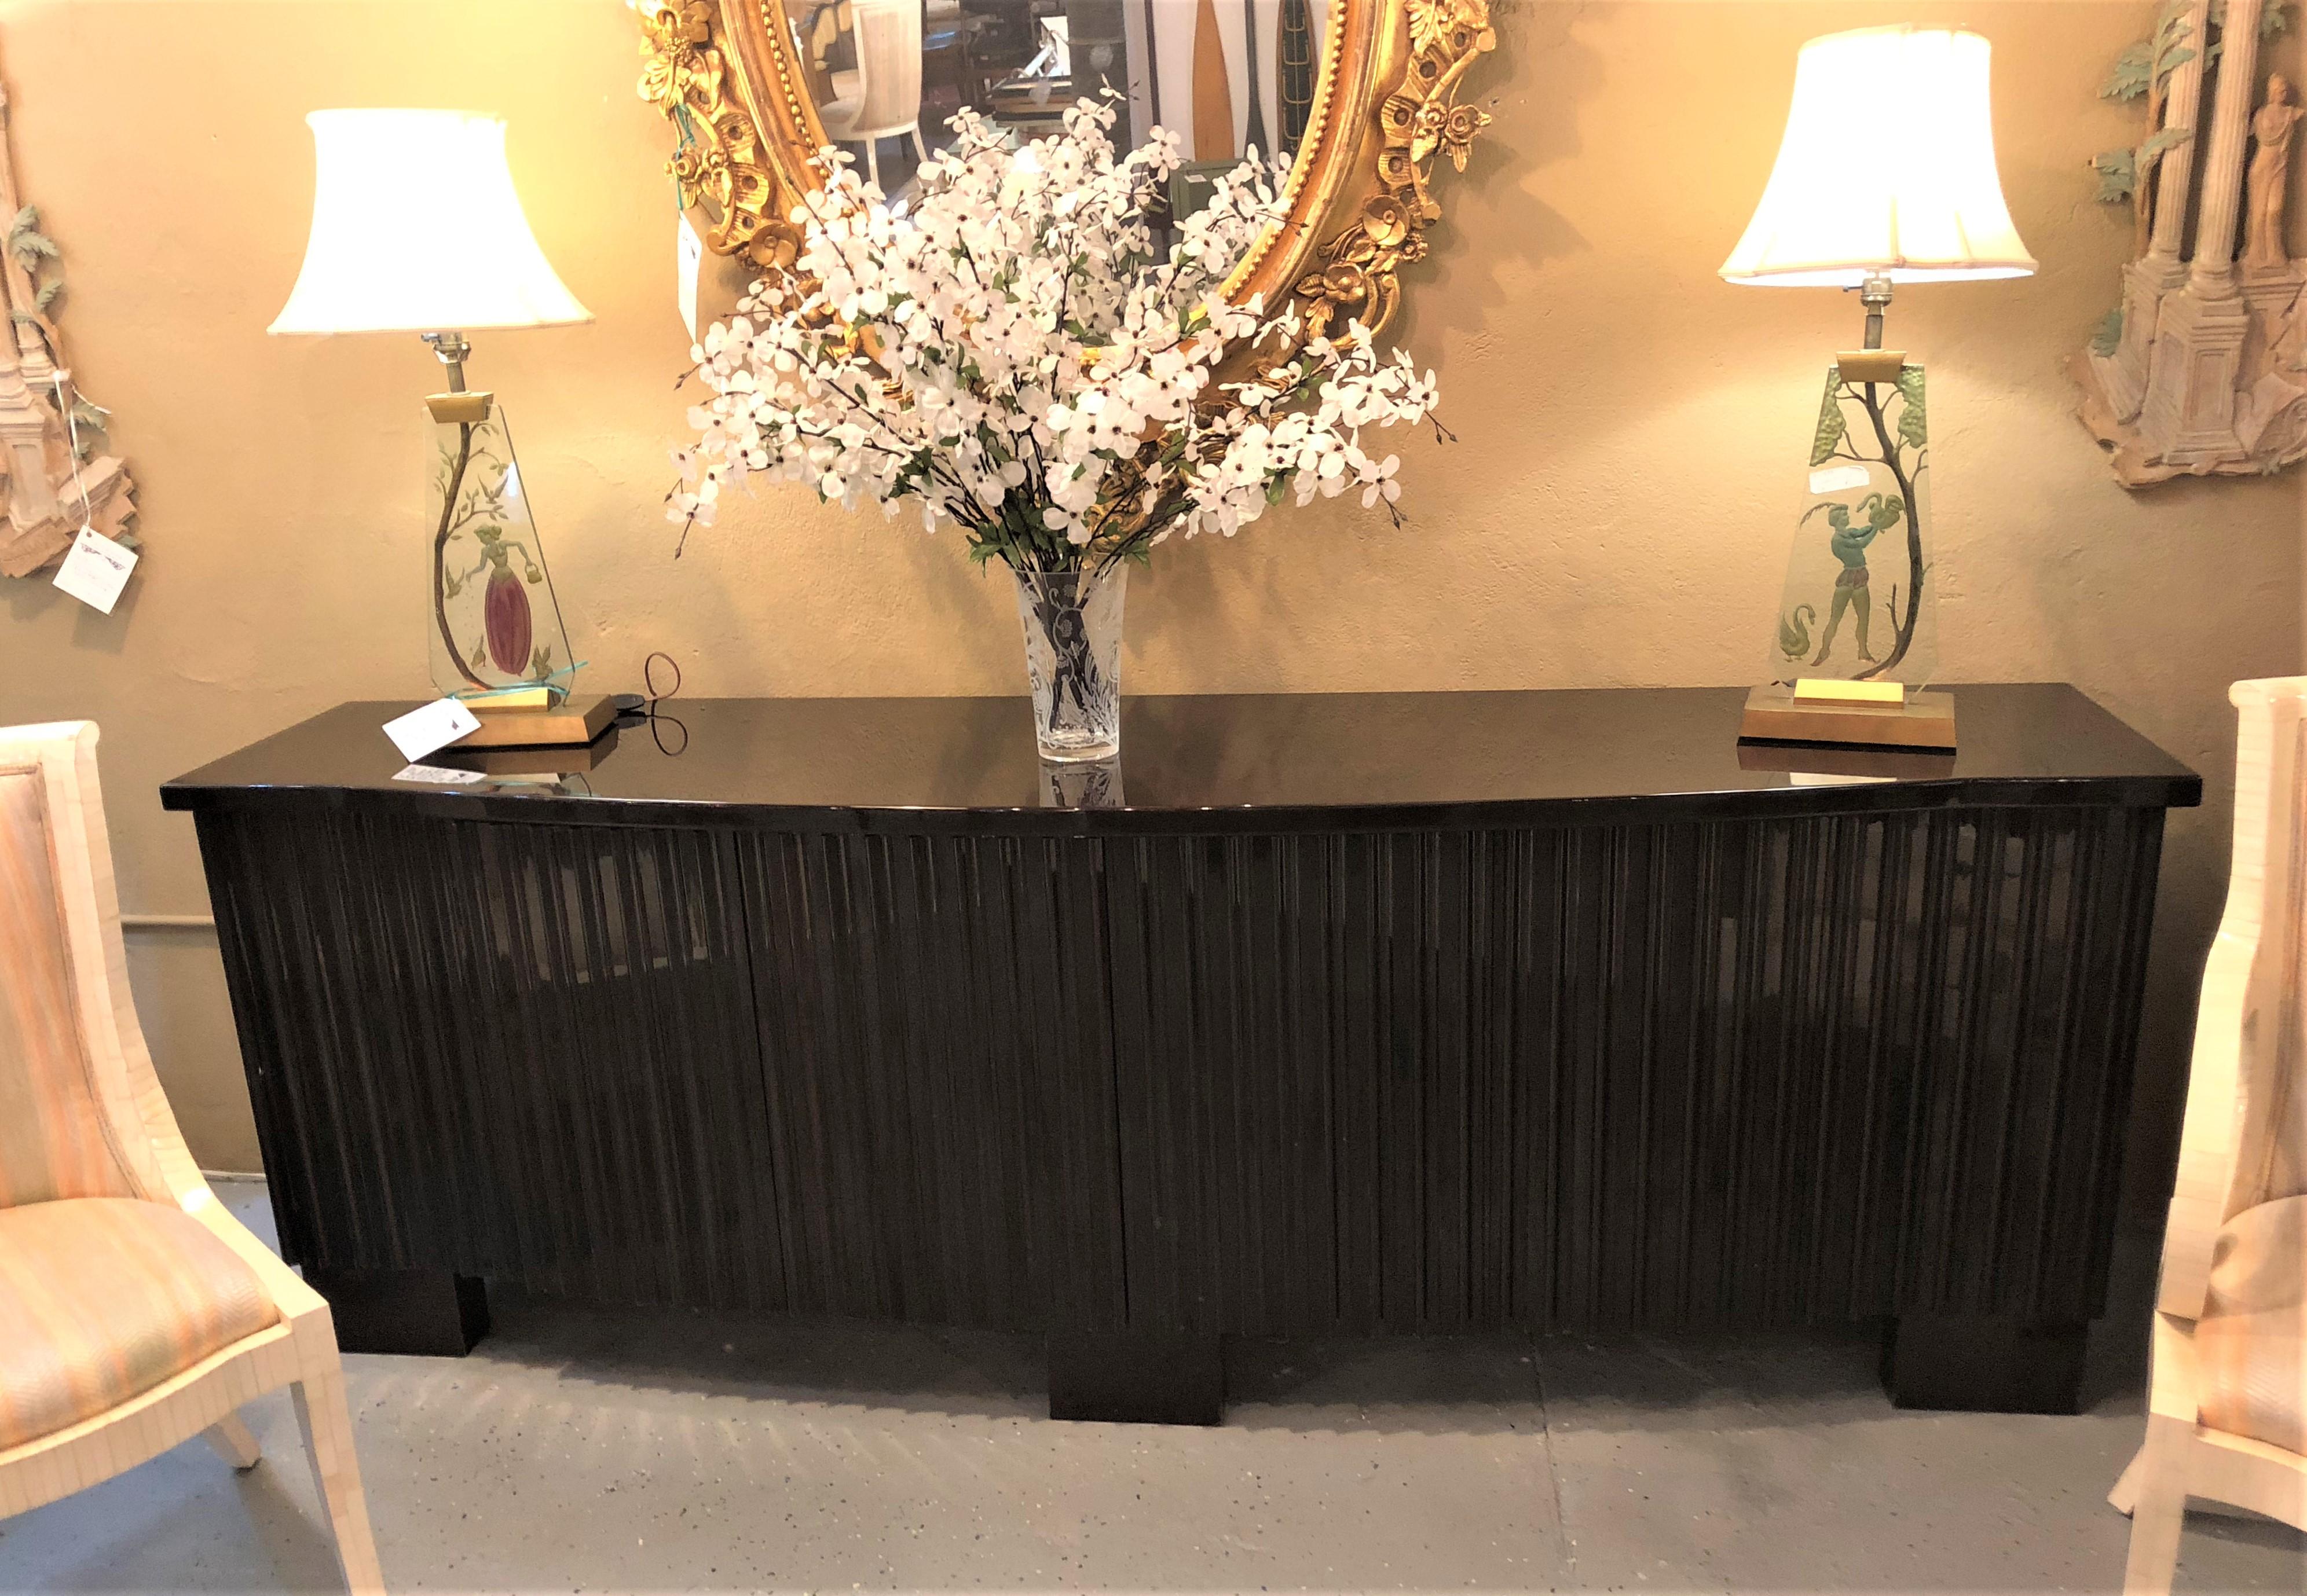 Palatial pace wavy front mahogany lacquered credenza or sideboard. This is simply the most stunning of all dining sideboards or credenzas. Having been retailed by pace to a fine Greenwich CT home this case recently consigned to Greenwich living has